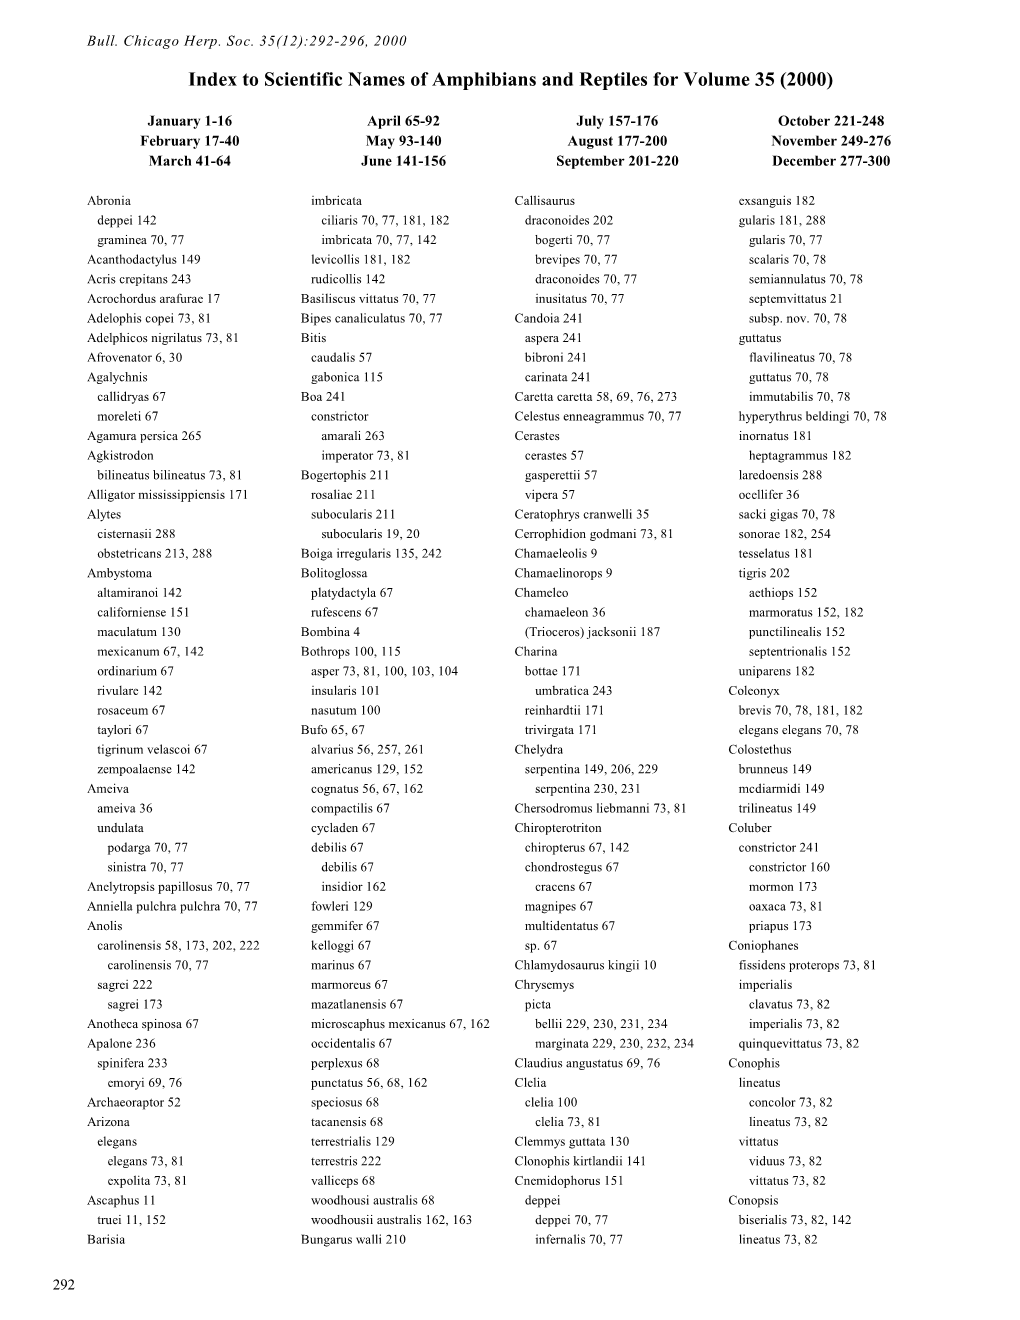 Index to Scientific Names of Amphibians and Reptiles for Volume 35 (2000)